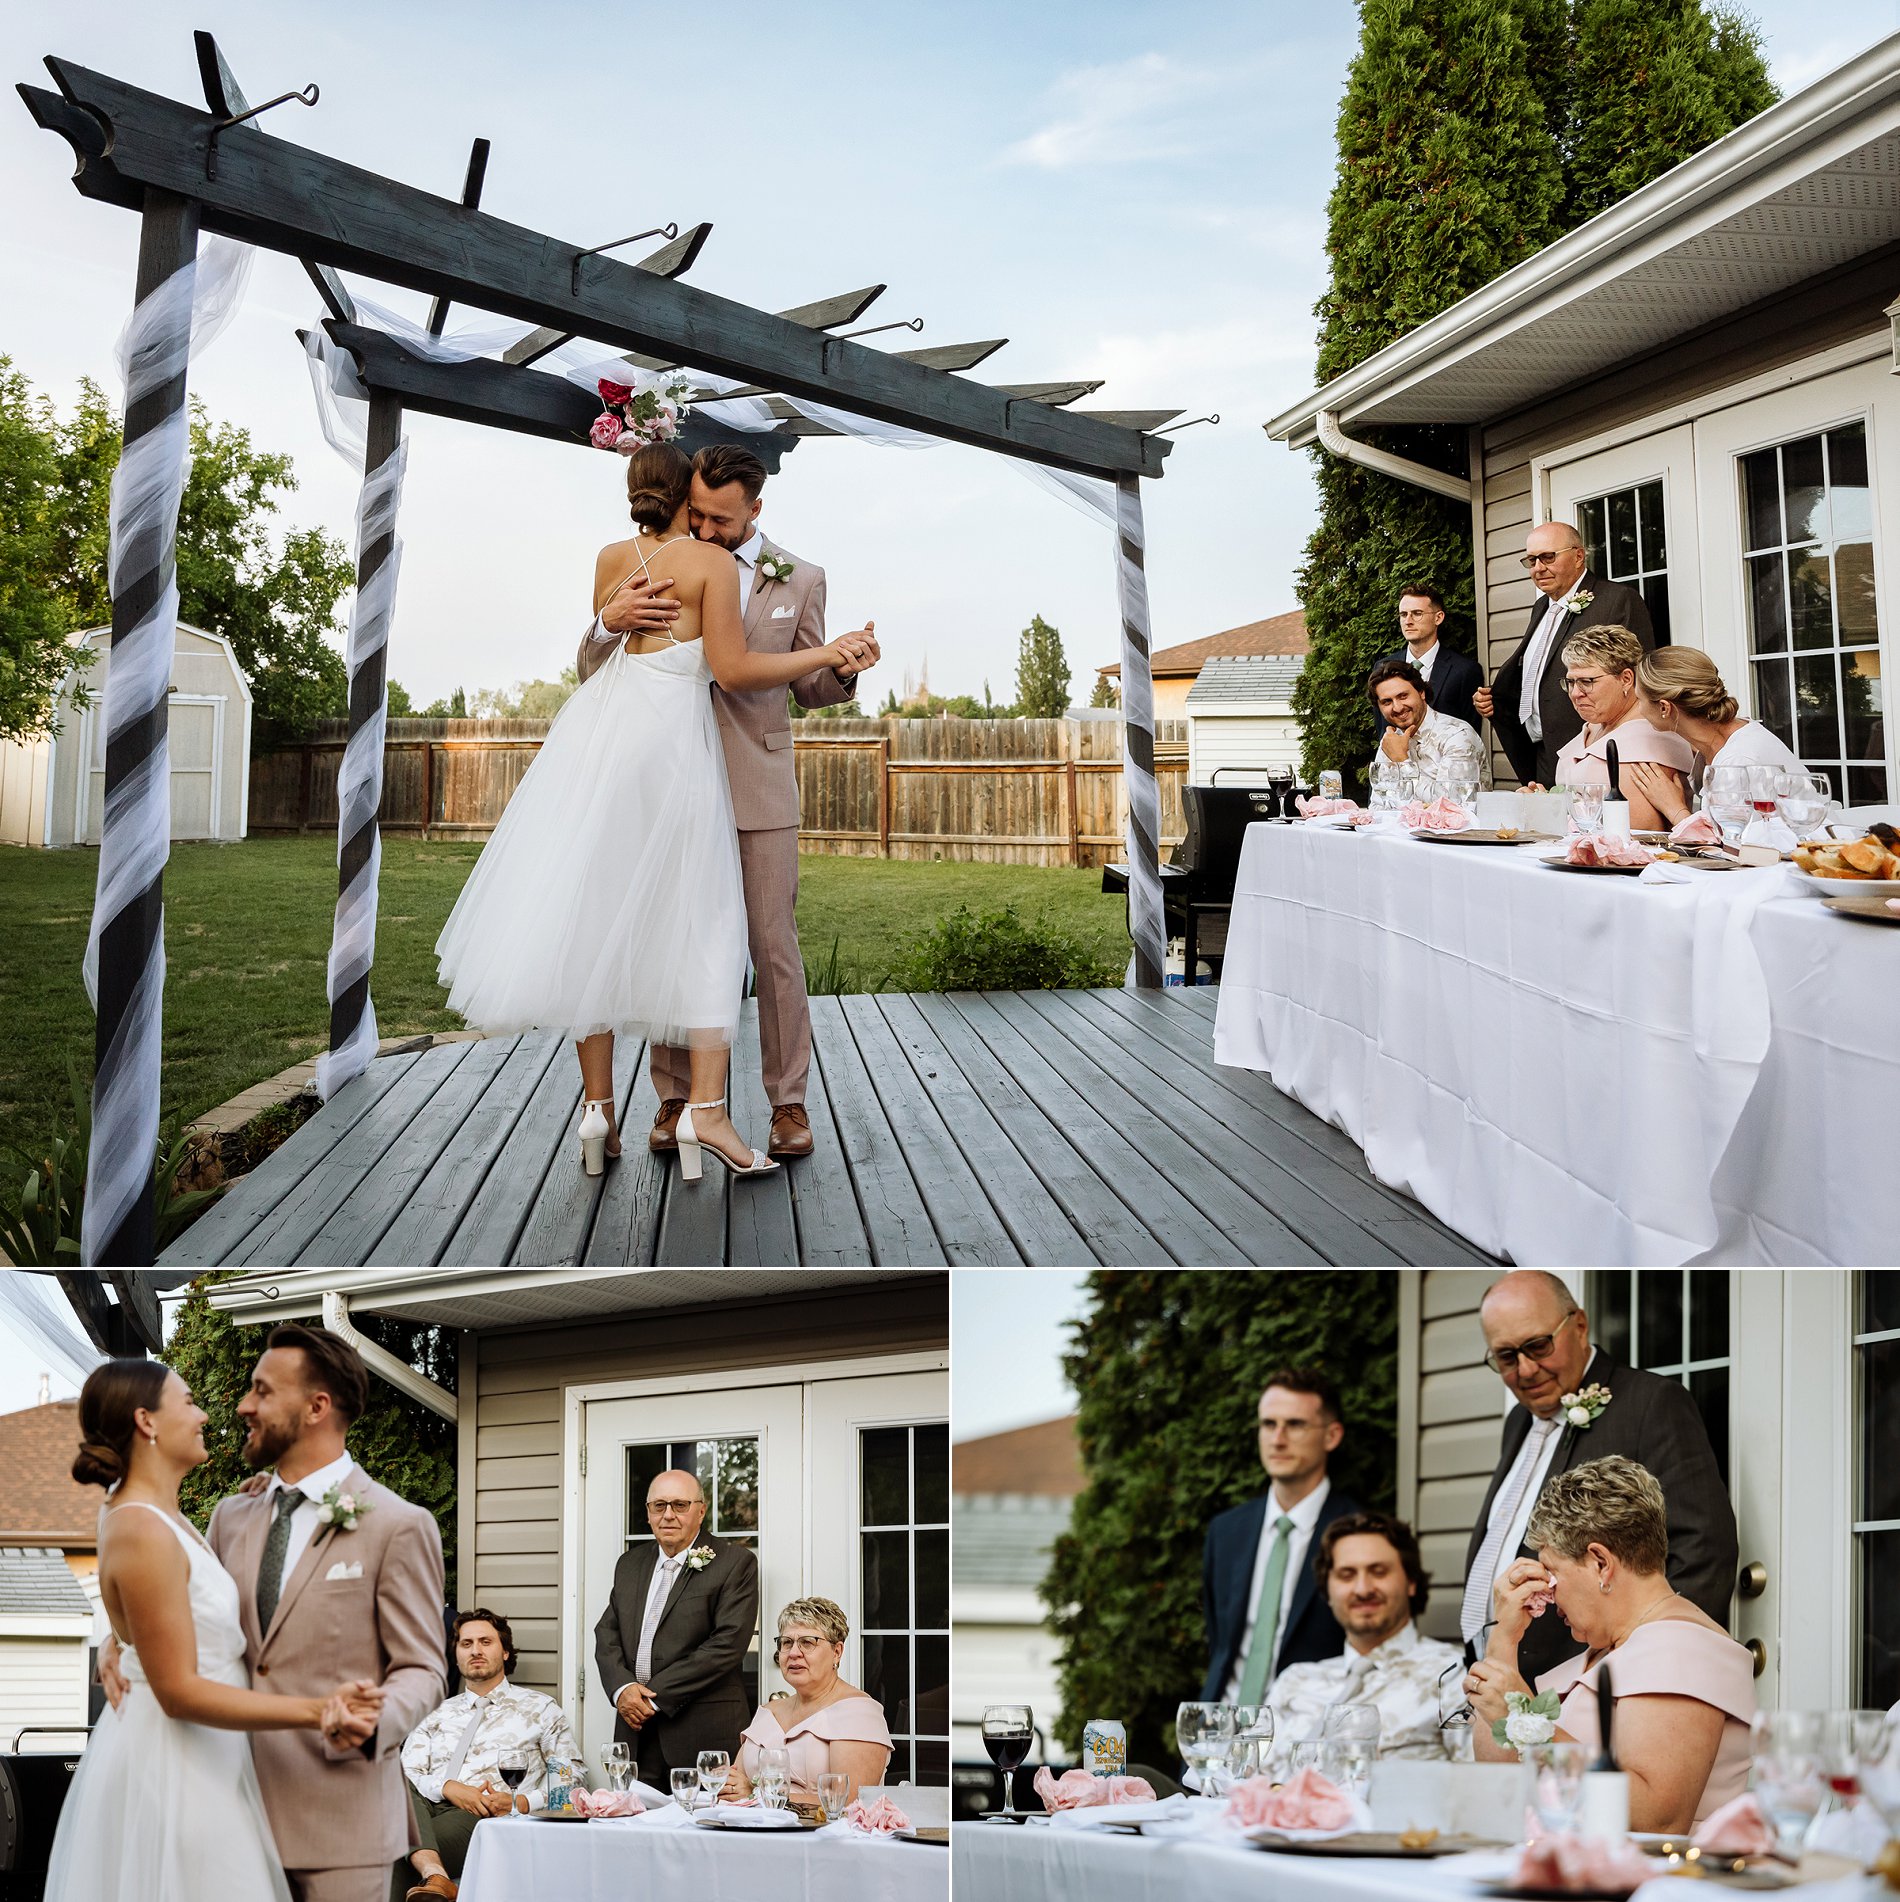 Bride and groom share an emotional first dance on the back deck at their outdoor wedding reception.